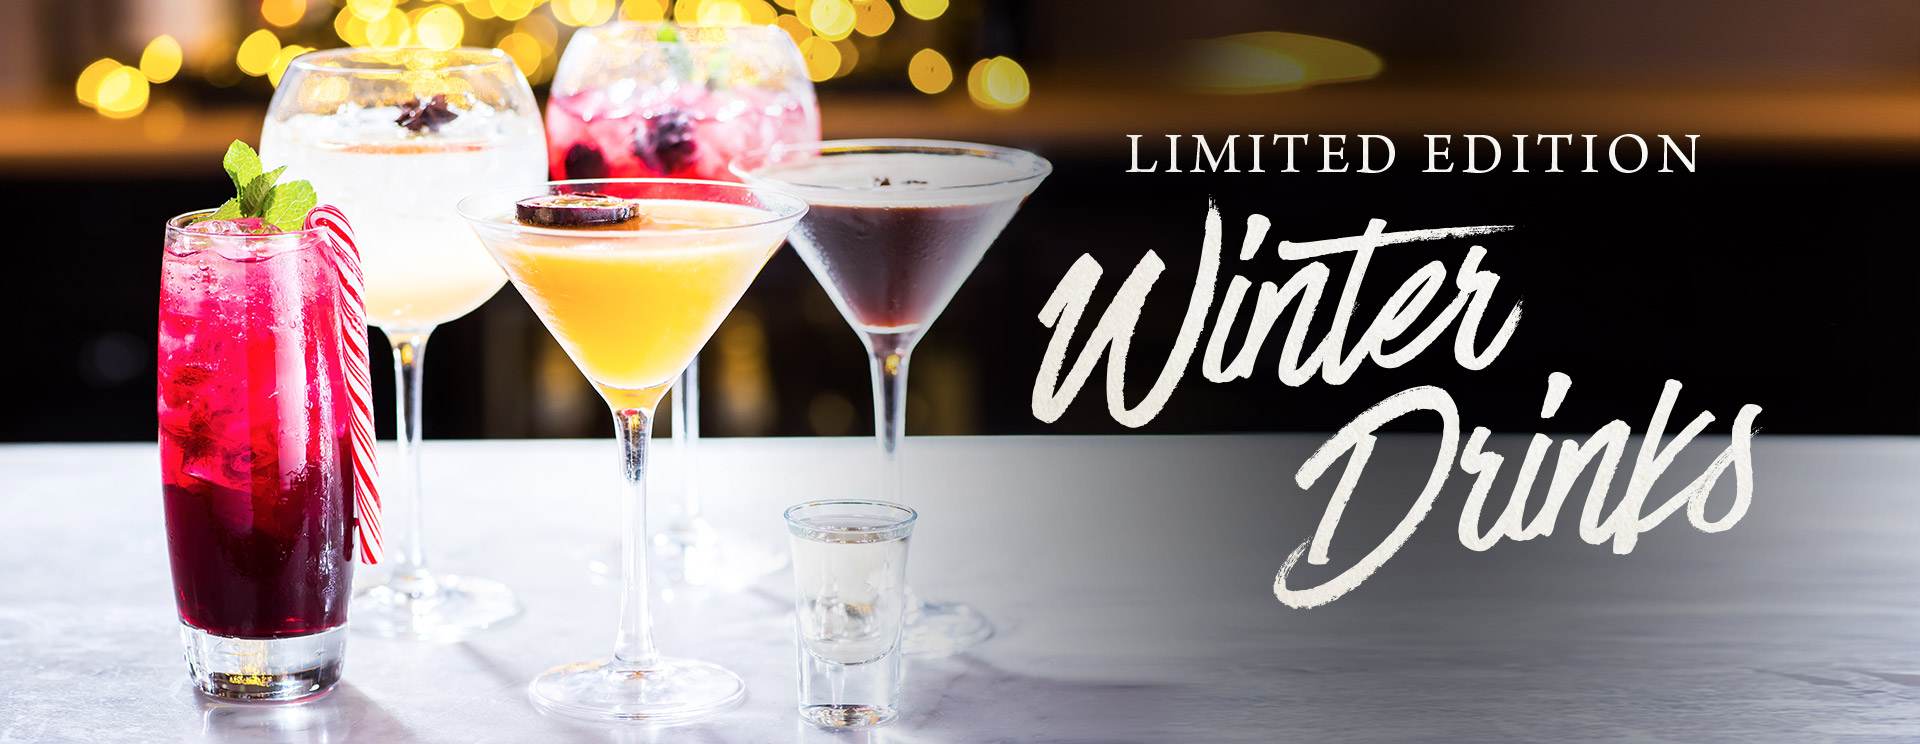 Winter cocktails and long drinks at The Brampton Mill